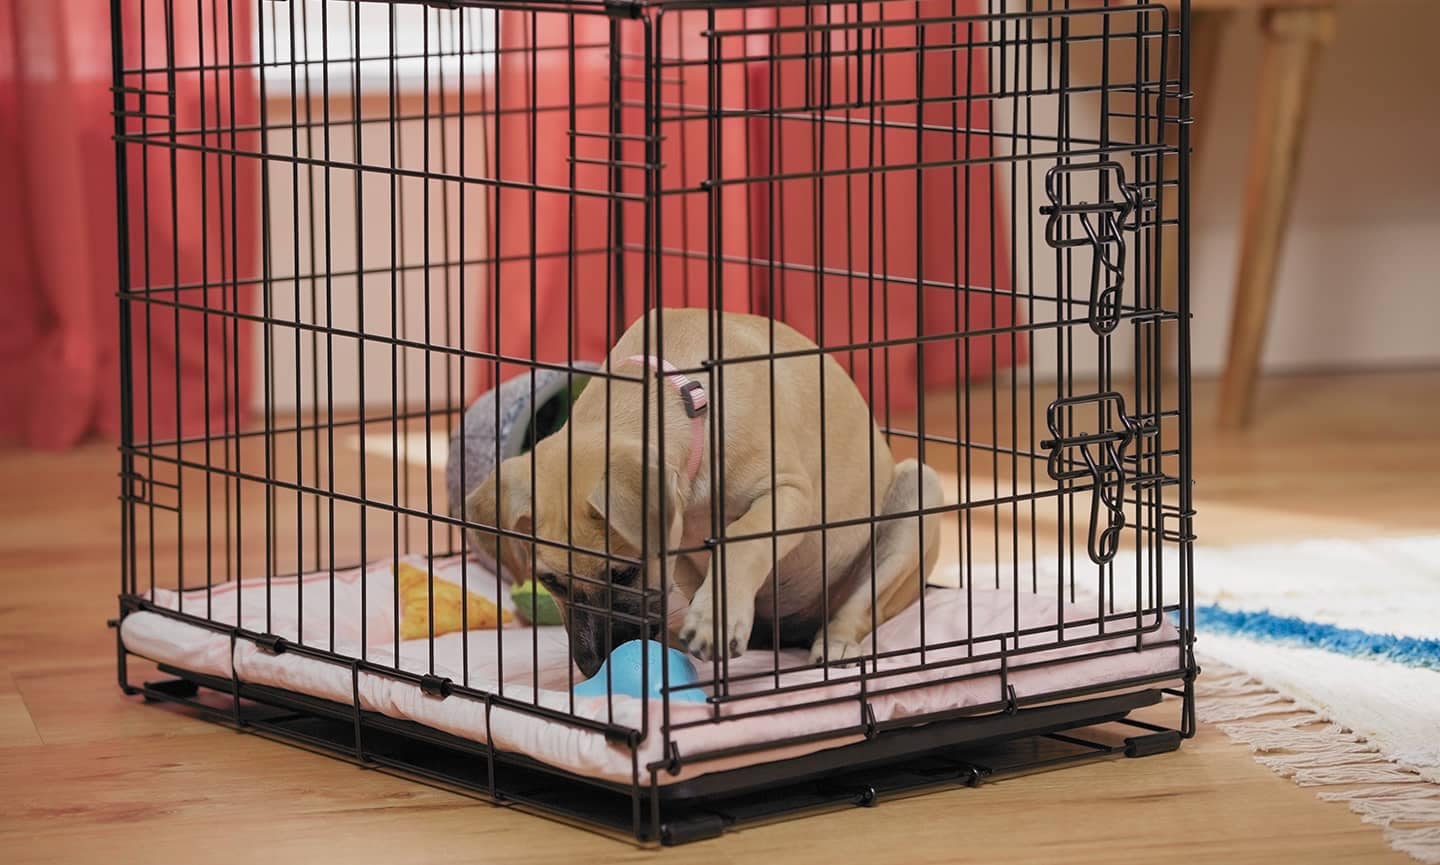 How to Crate Train your dog or puppy